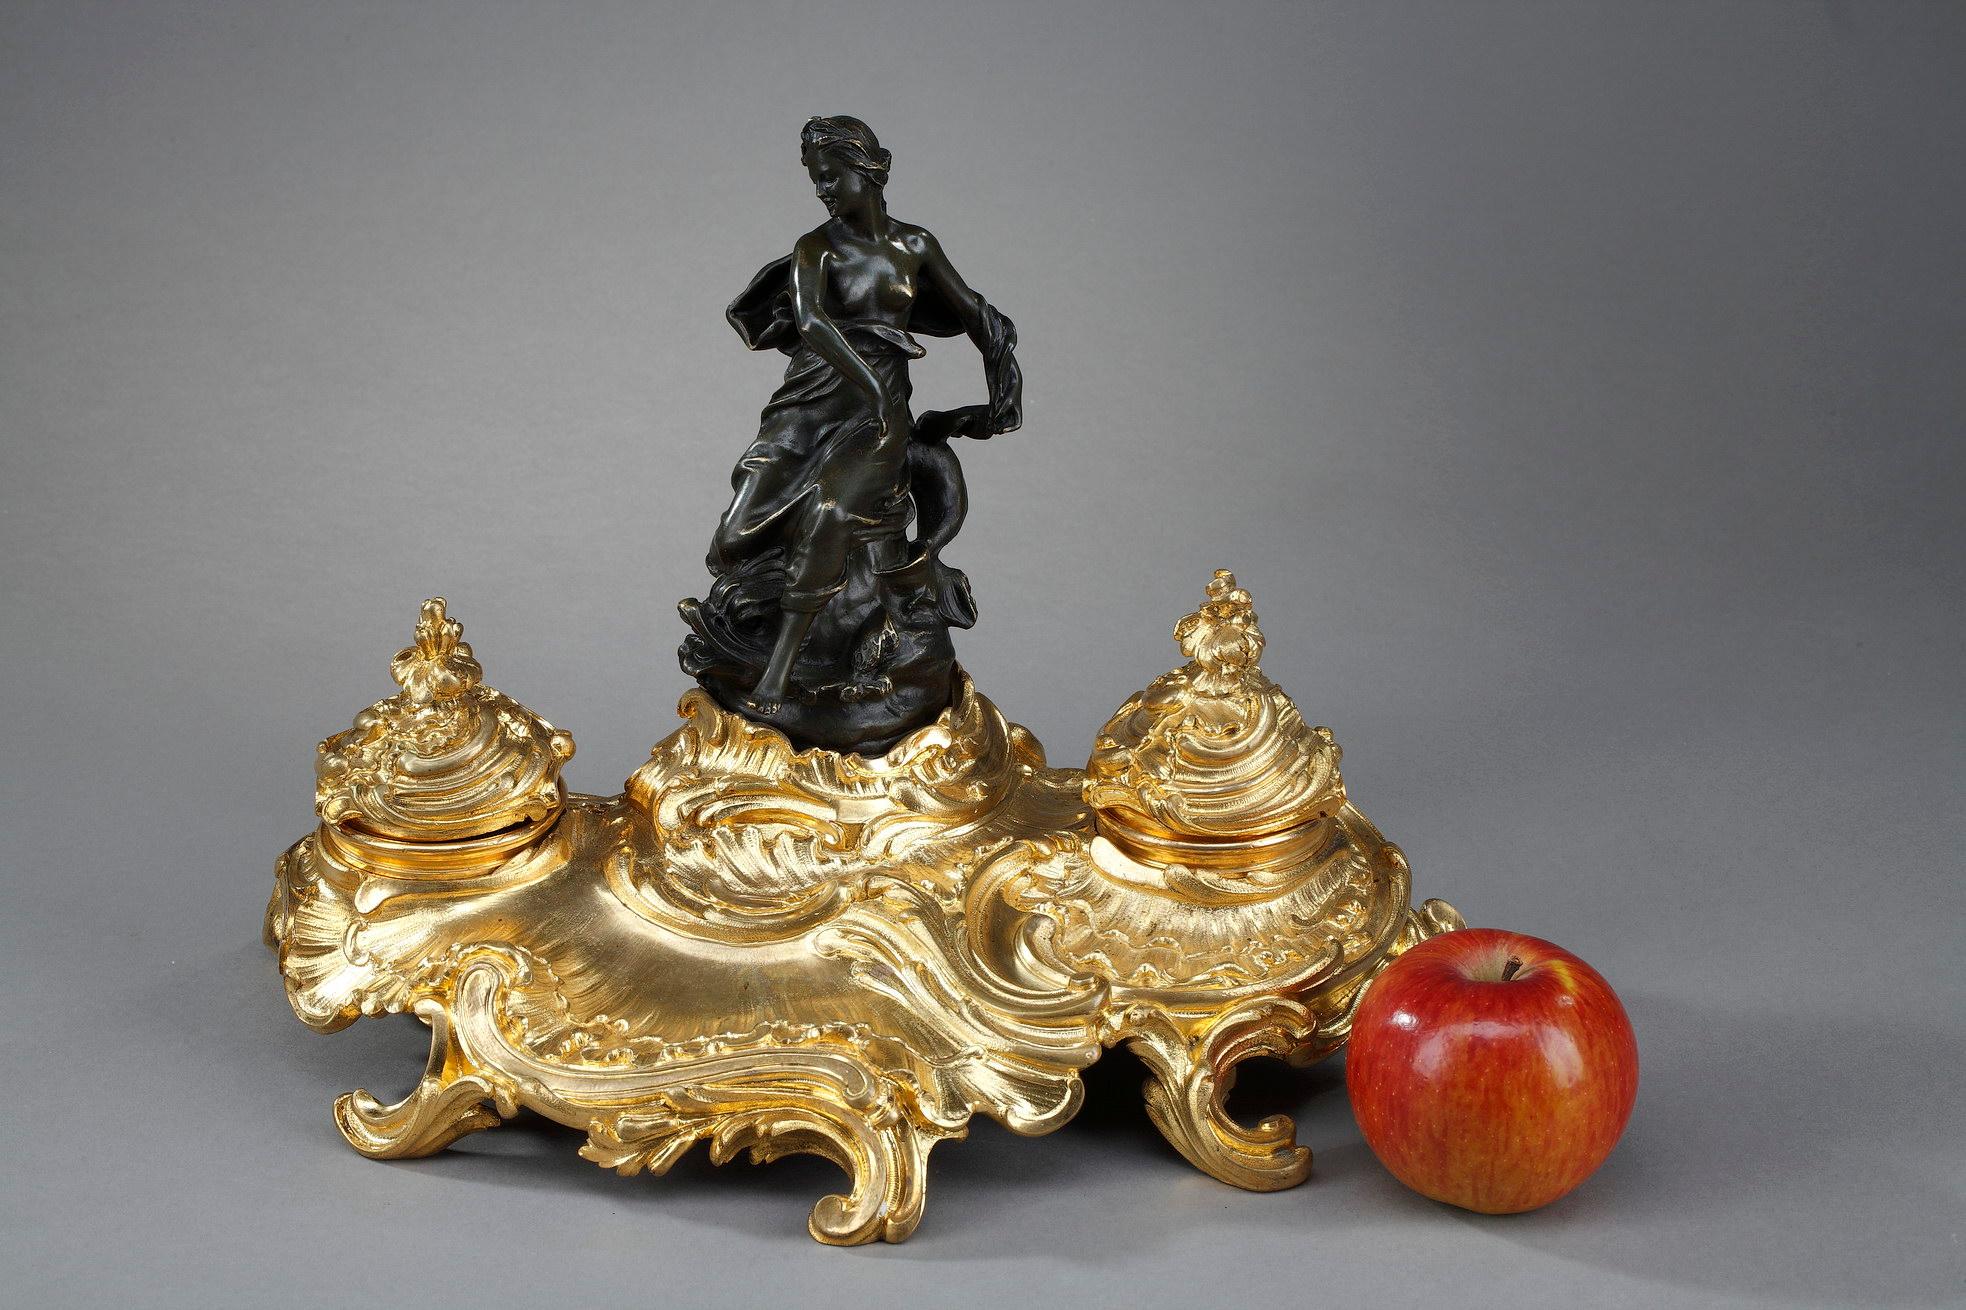 Rocaille inkwell representing a goddess in the Antique style in bronze with brown patina, resting on a gilt bronze base decorated with rocaille and foliage scrolls, with two cups. The lids of the inkwells are chiseled with leaves. The deep work